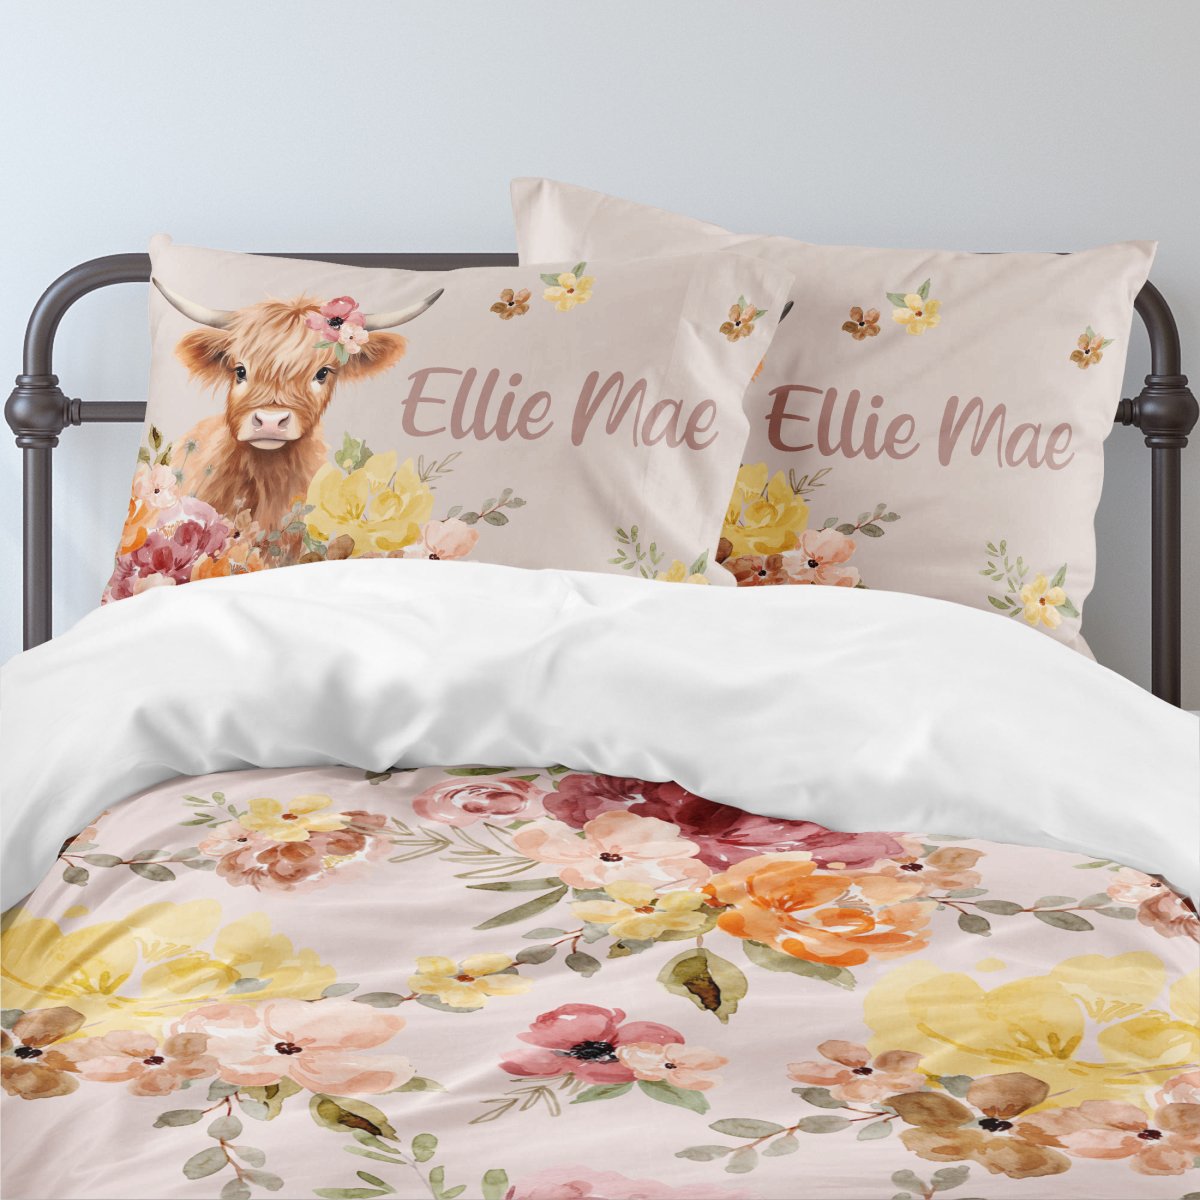 Highland Cow Wildflower Personalized Kids Bedding Set (Comforter or Duvet Cover) - gender_girl, Highland Cow Wildflower, text